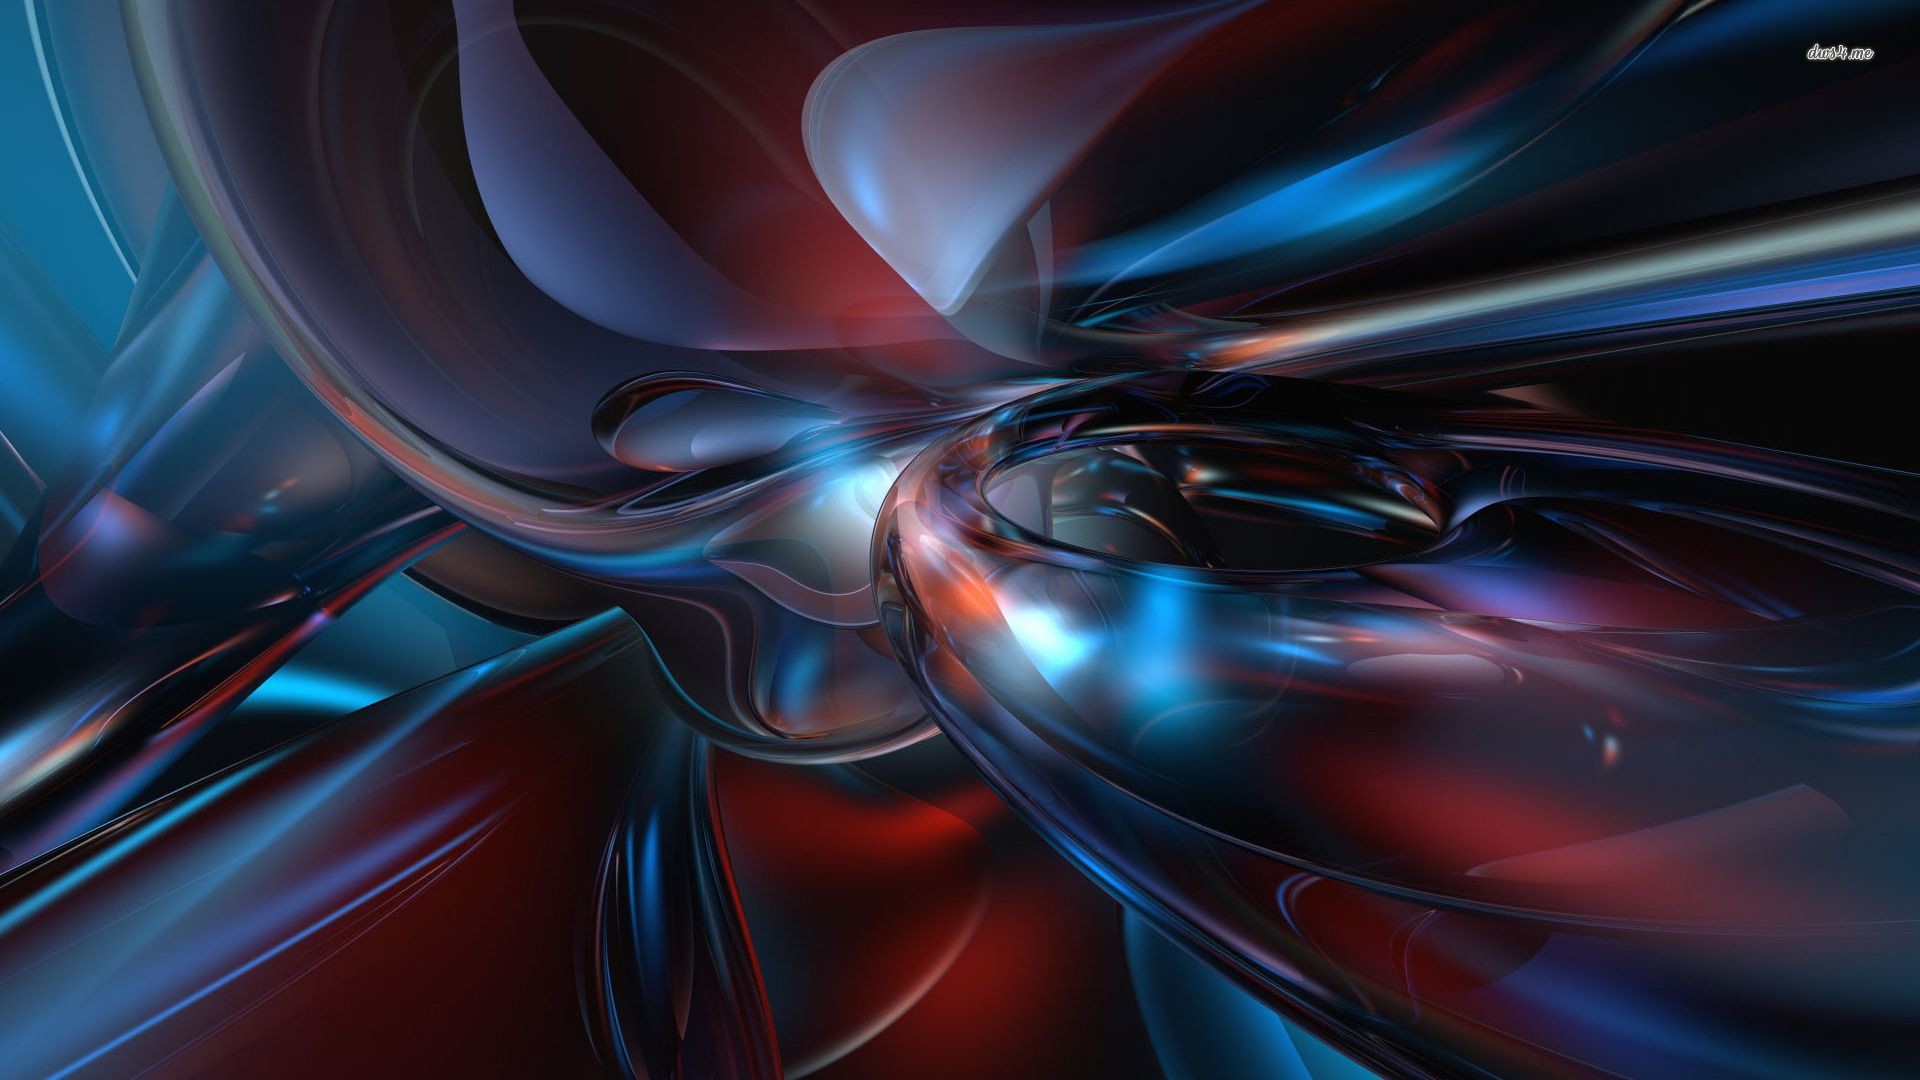 1920x1080 Red and blue shapes wallpaper - 3D wallpapers - #4713